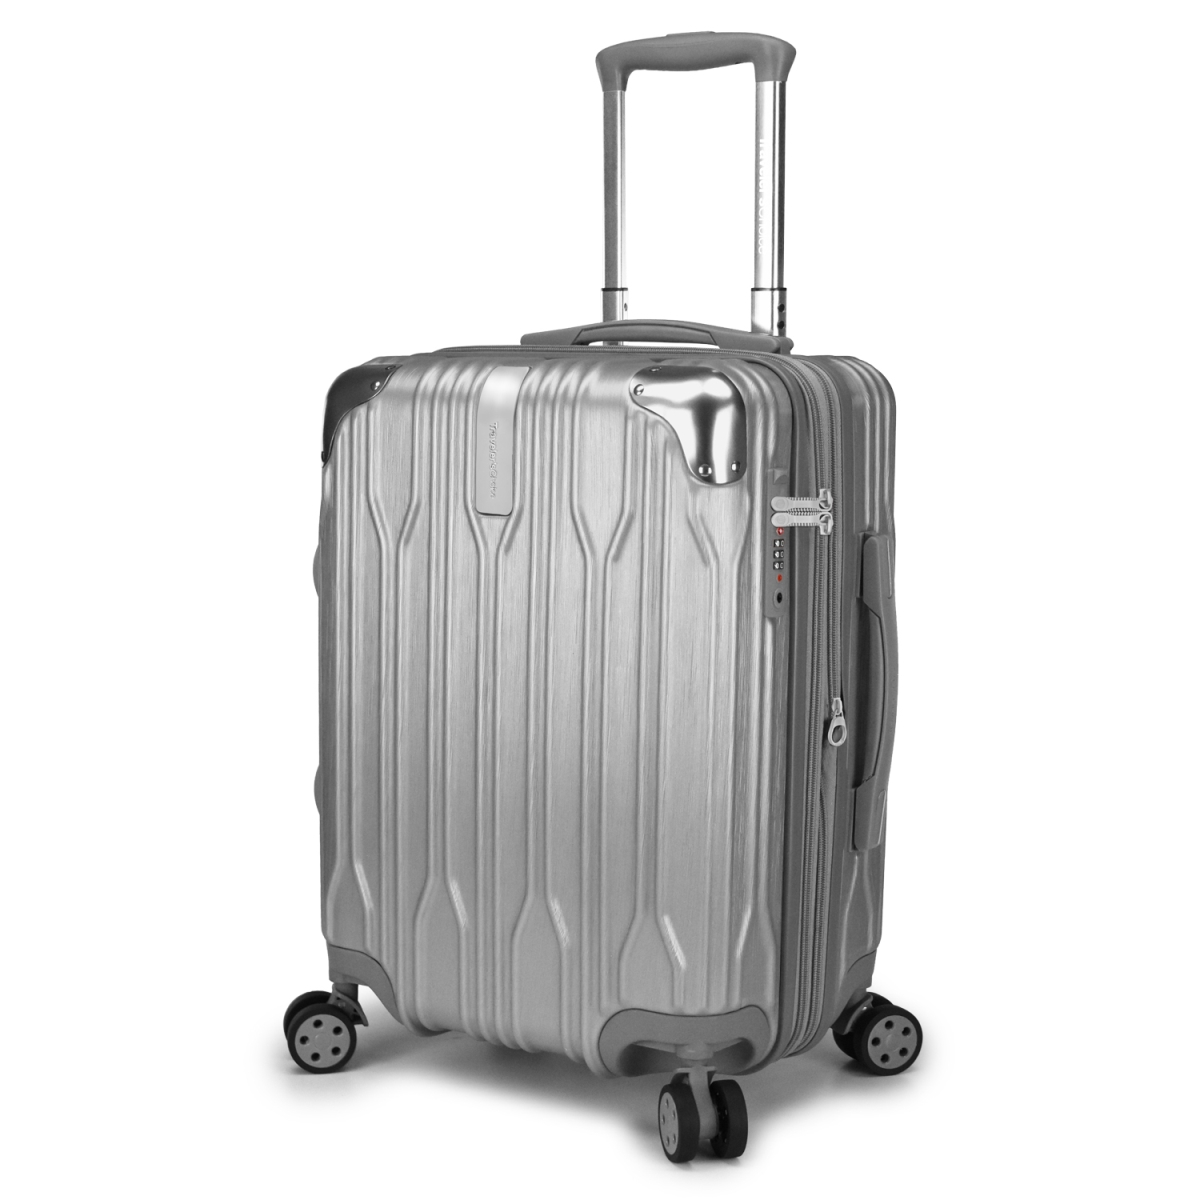 Travelers Choice Tc09035g20 Bell Weather Expandable 20 In. Spinner Luggage, Silver